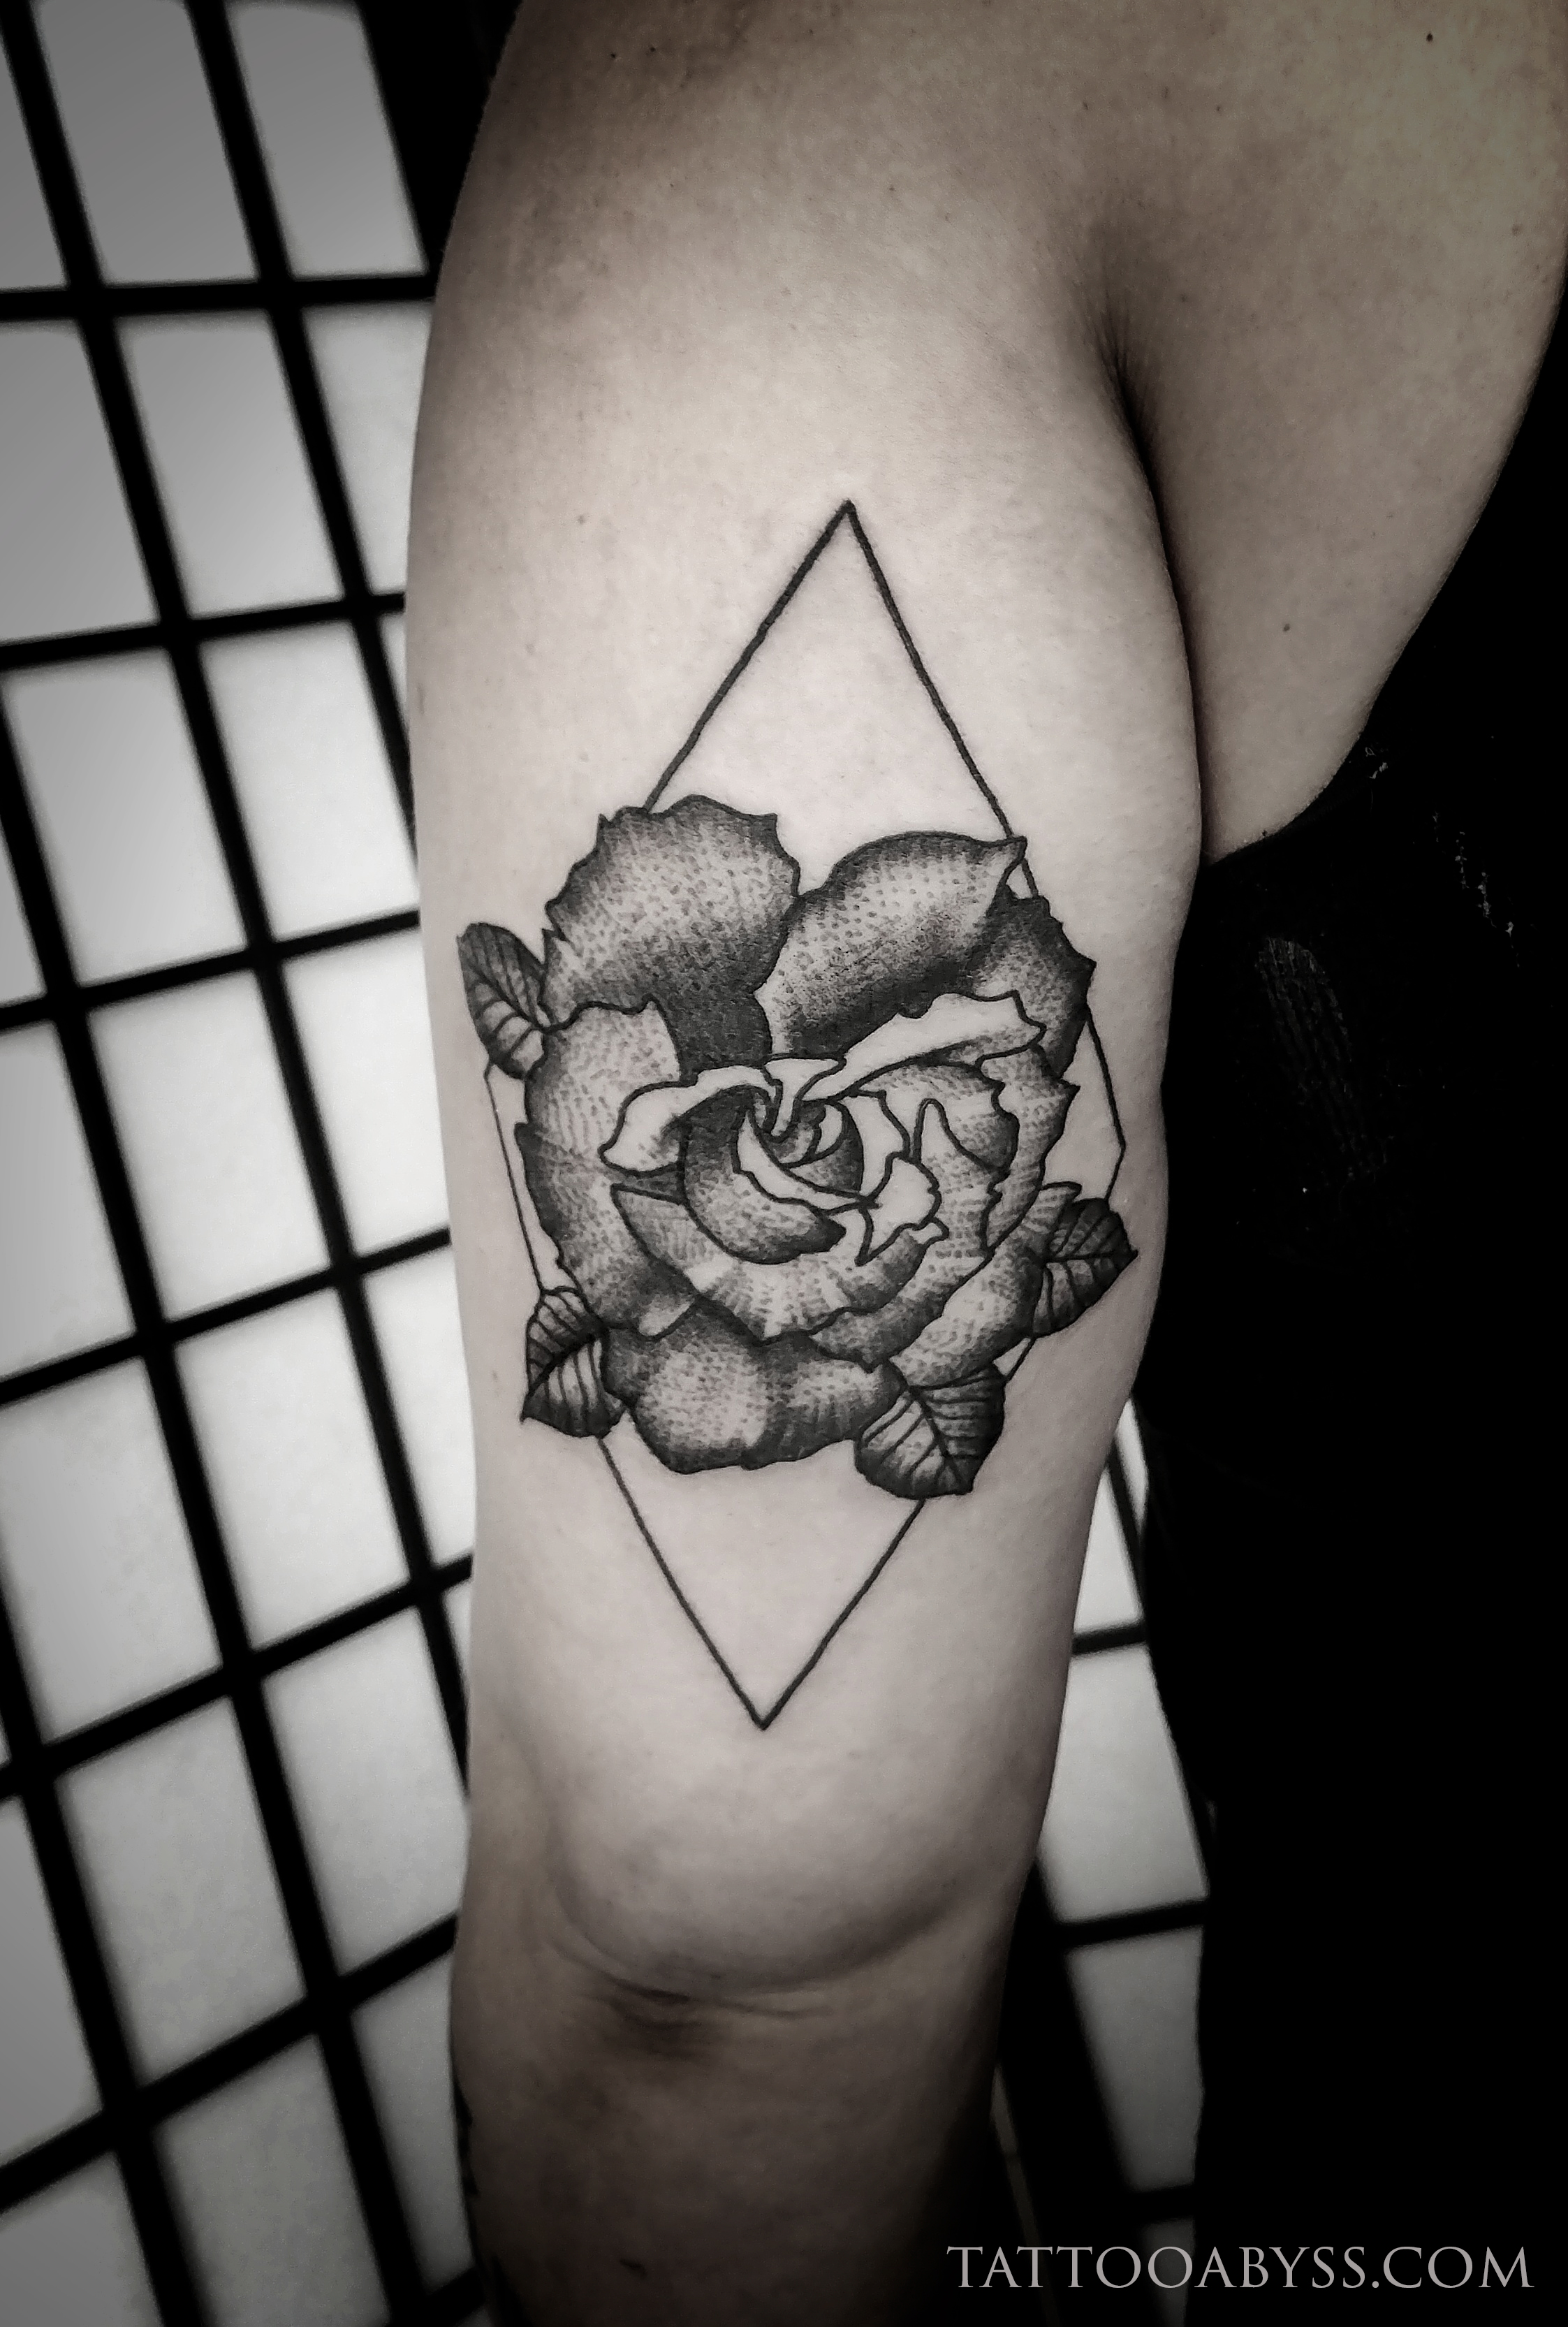 Geometric Tattoos – About the Style, Sketch Ideas, and Features | CTM